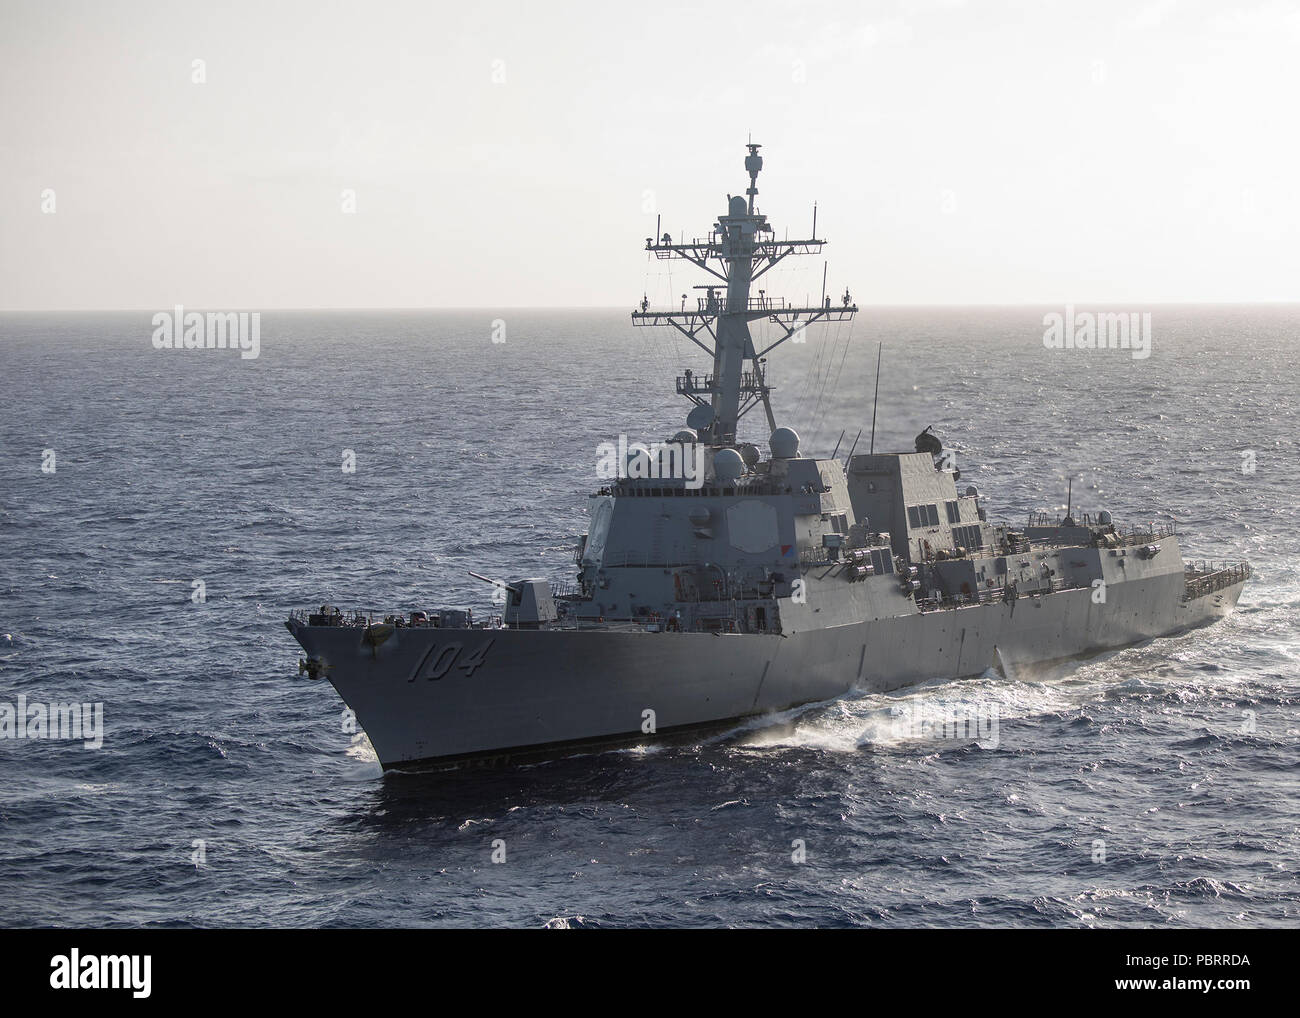 180727-N-PM193-0929 PACIFIC OCEAN (July 27, 2018) Guided-missile destroyer USS Sterett (DDG 104) transits the Pacific Ocean. Sterett is underway in the U.S. 3rd Fleet area of operations. (U.S. Navy photo by Mass Communication Specialist 3rd Class Alexander C. Kubitza/Released) Stock Photo